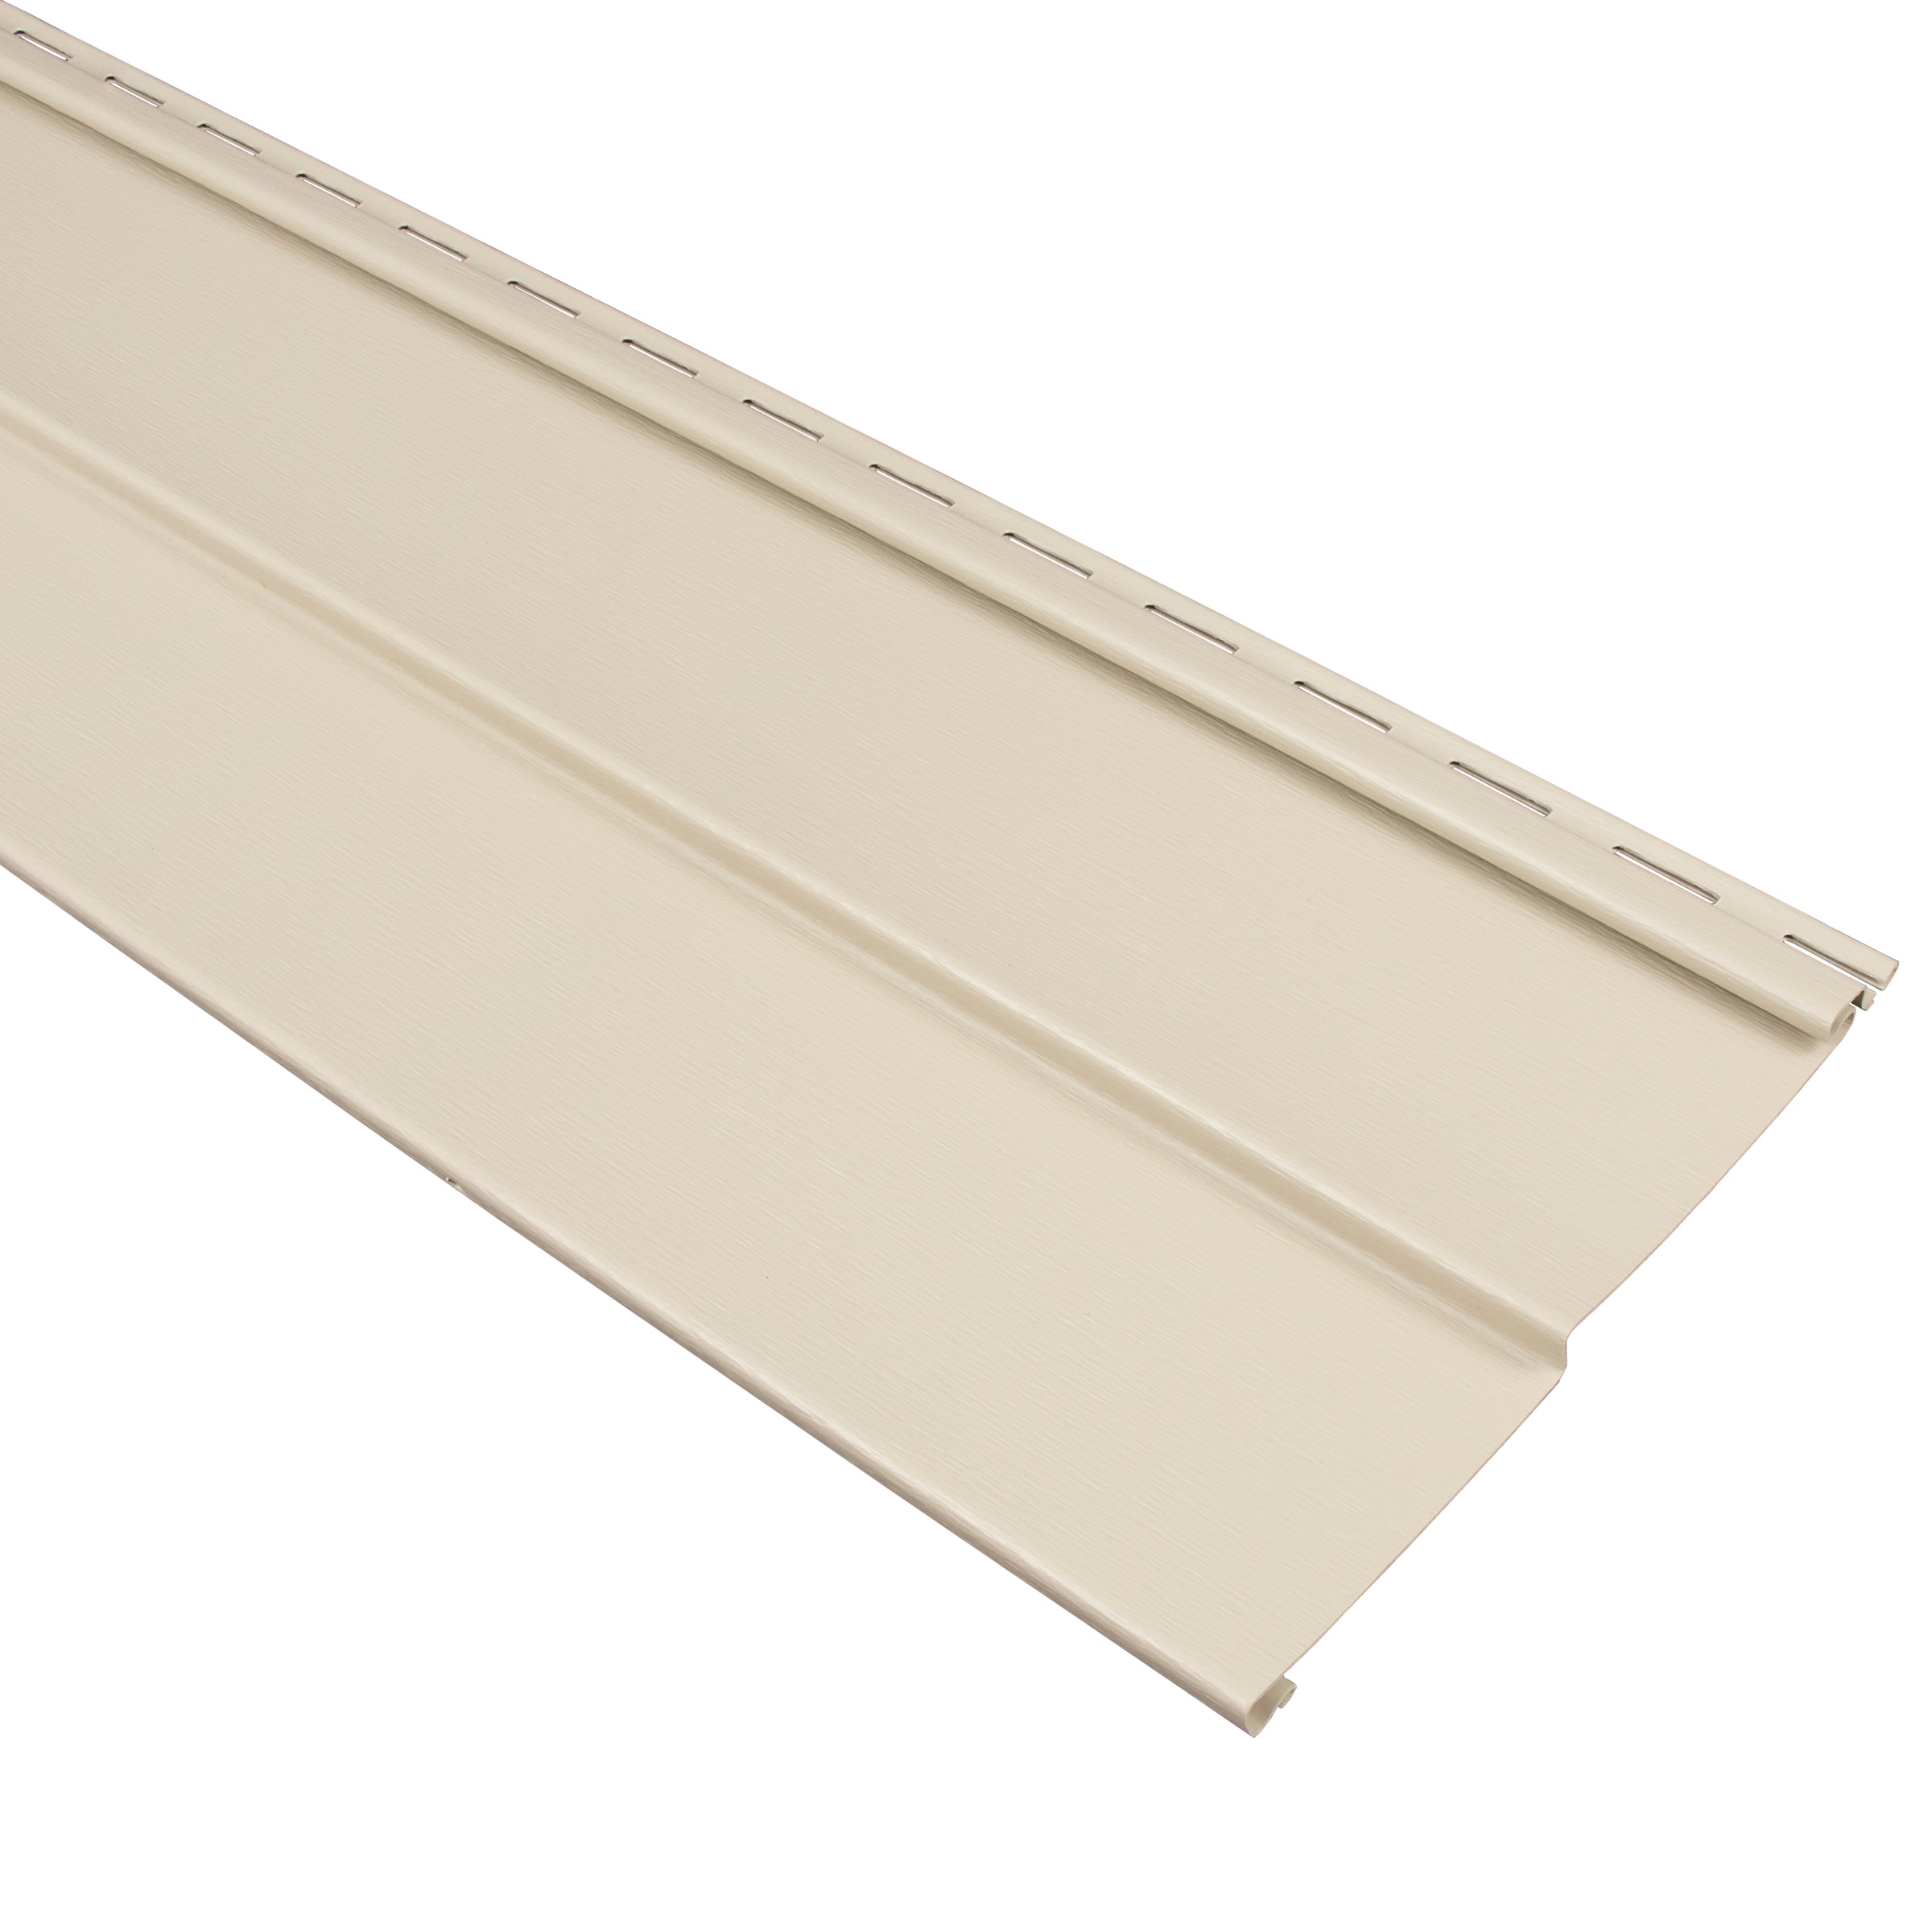 Double 4 traditional Vinyl Siding & Accessories at Lowes.com